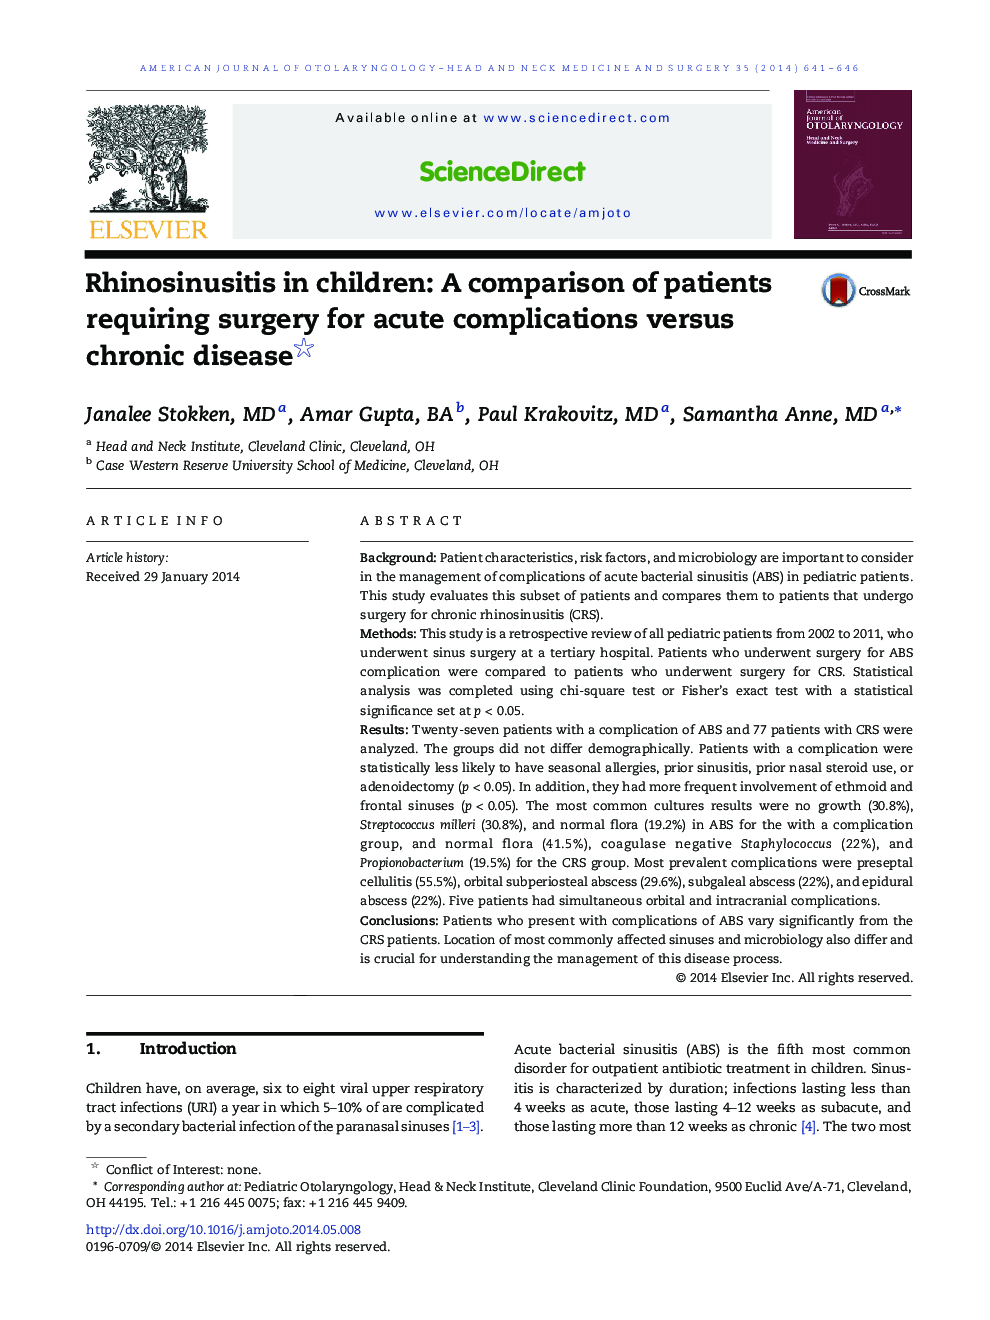 Rhinosinusitis in children: A comparison of patients requiring surgery for acute complications versus chronic disease 